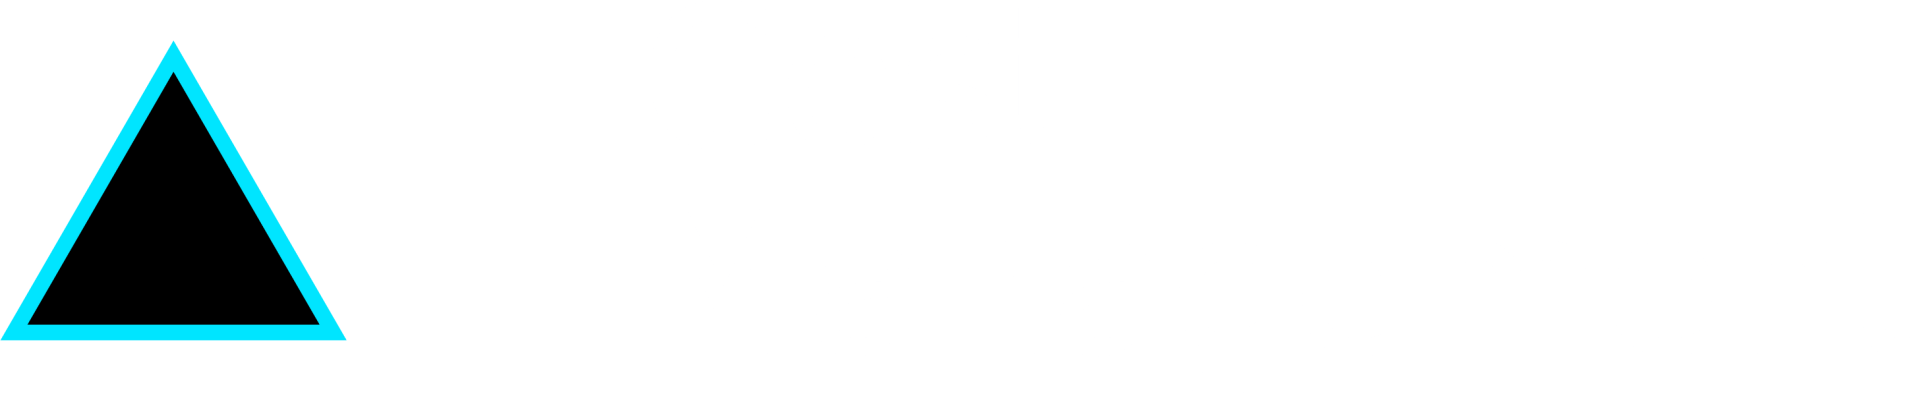 Triangle icon Cost Management